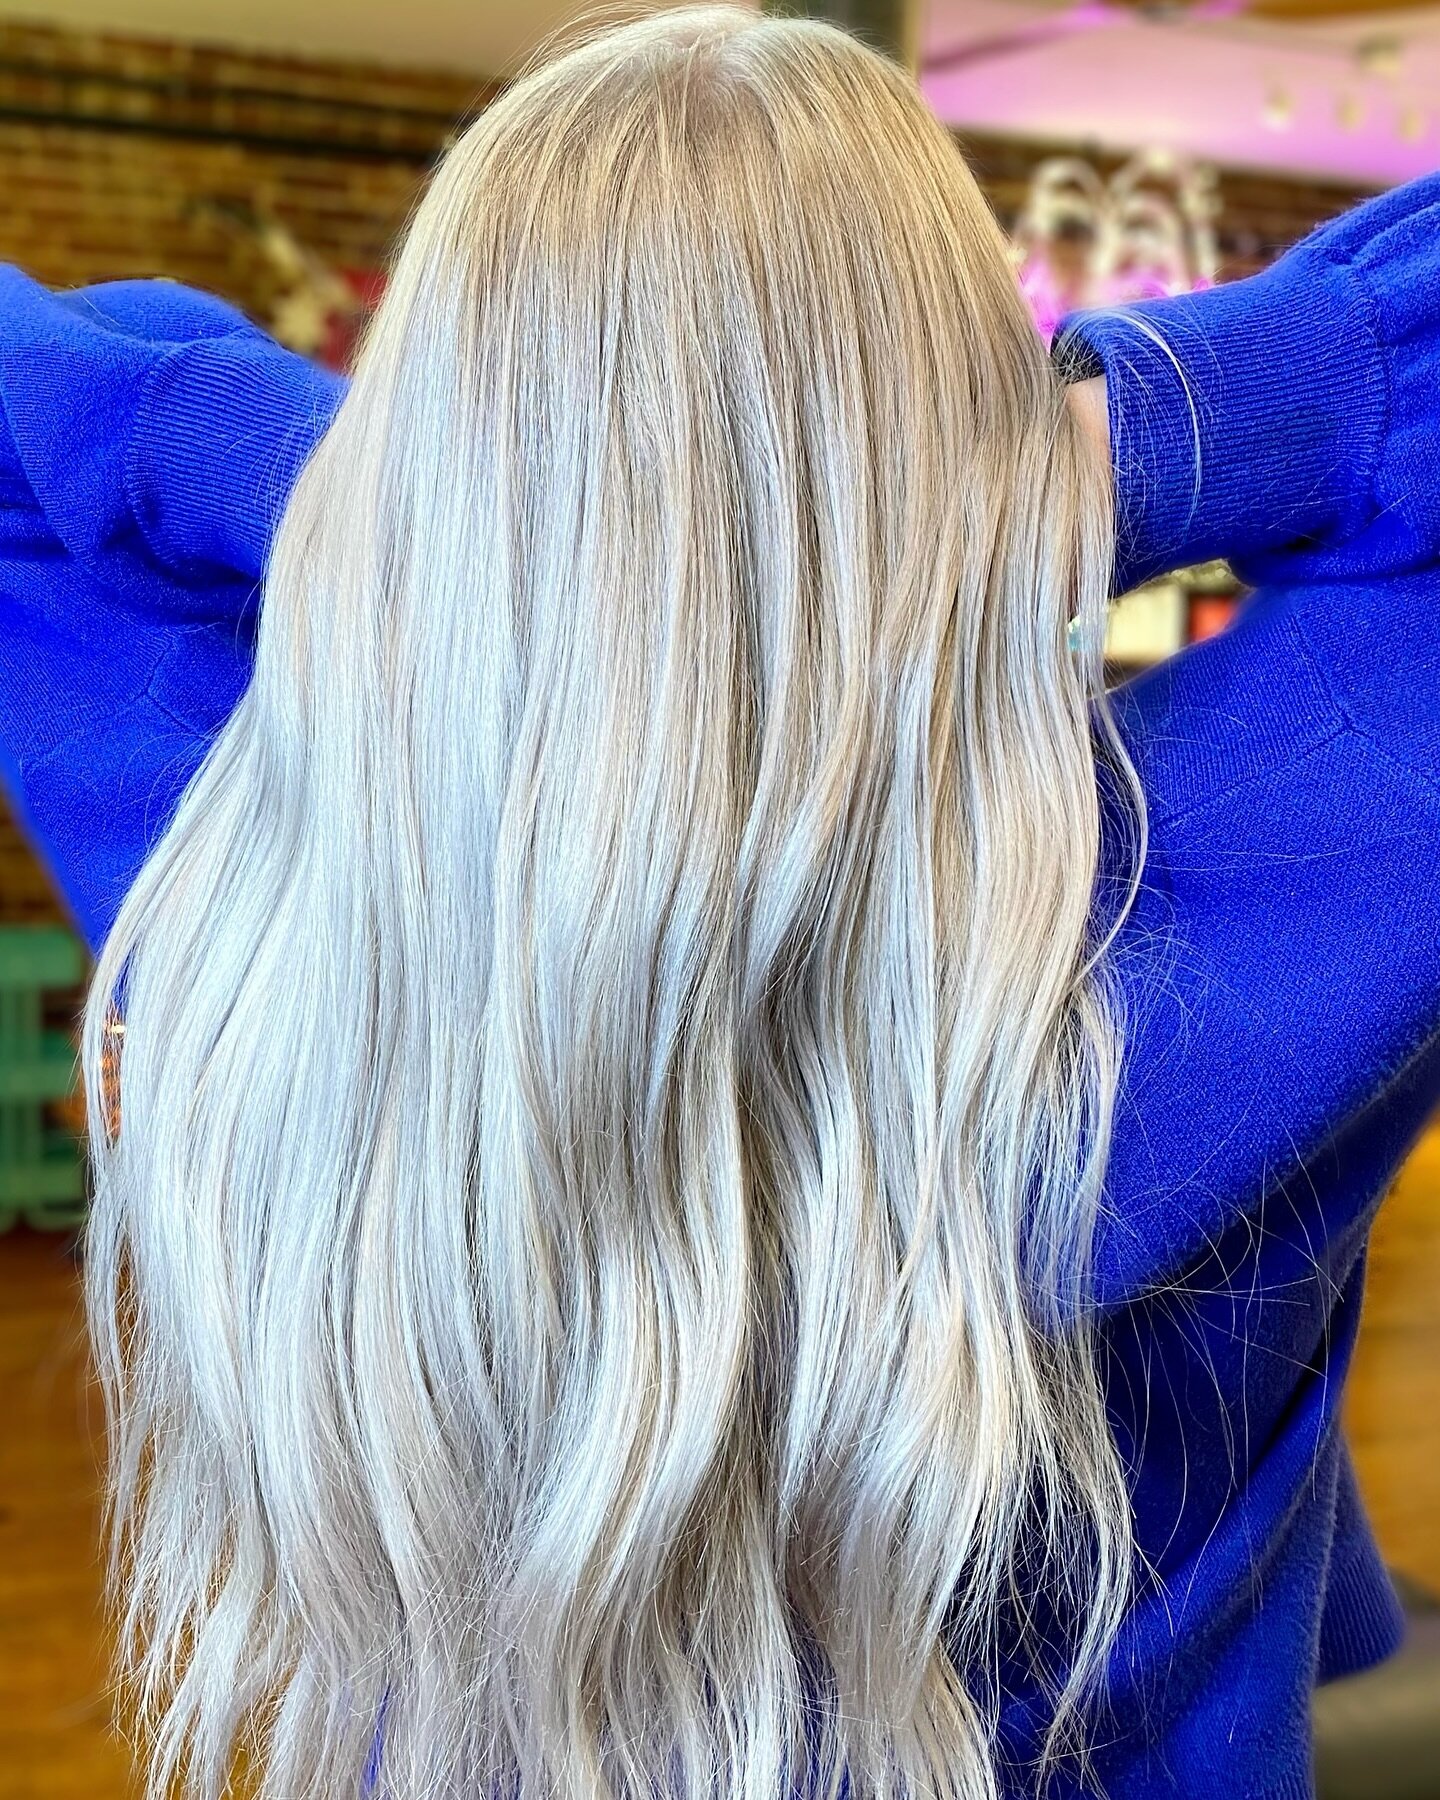 I&rsquo;ve been busting my butt correcting @graceinthesouth botched bleach and tone💪🏻 She came to me for a color consult with lots of banding from previous lightening services. I think we&rsquo;re both pretty happy with the results 3 appointments l